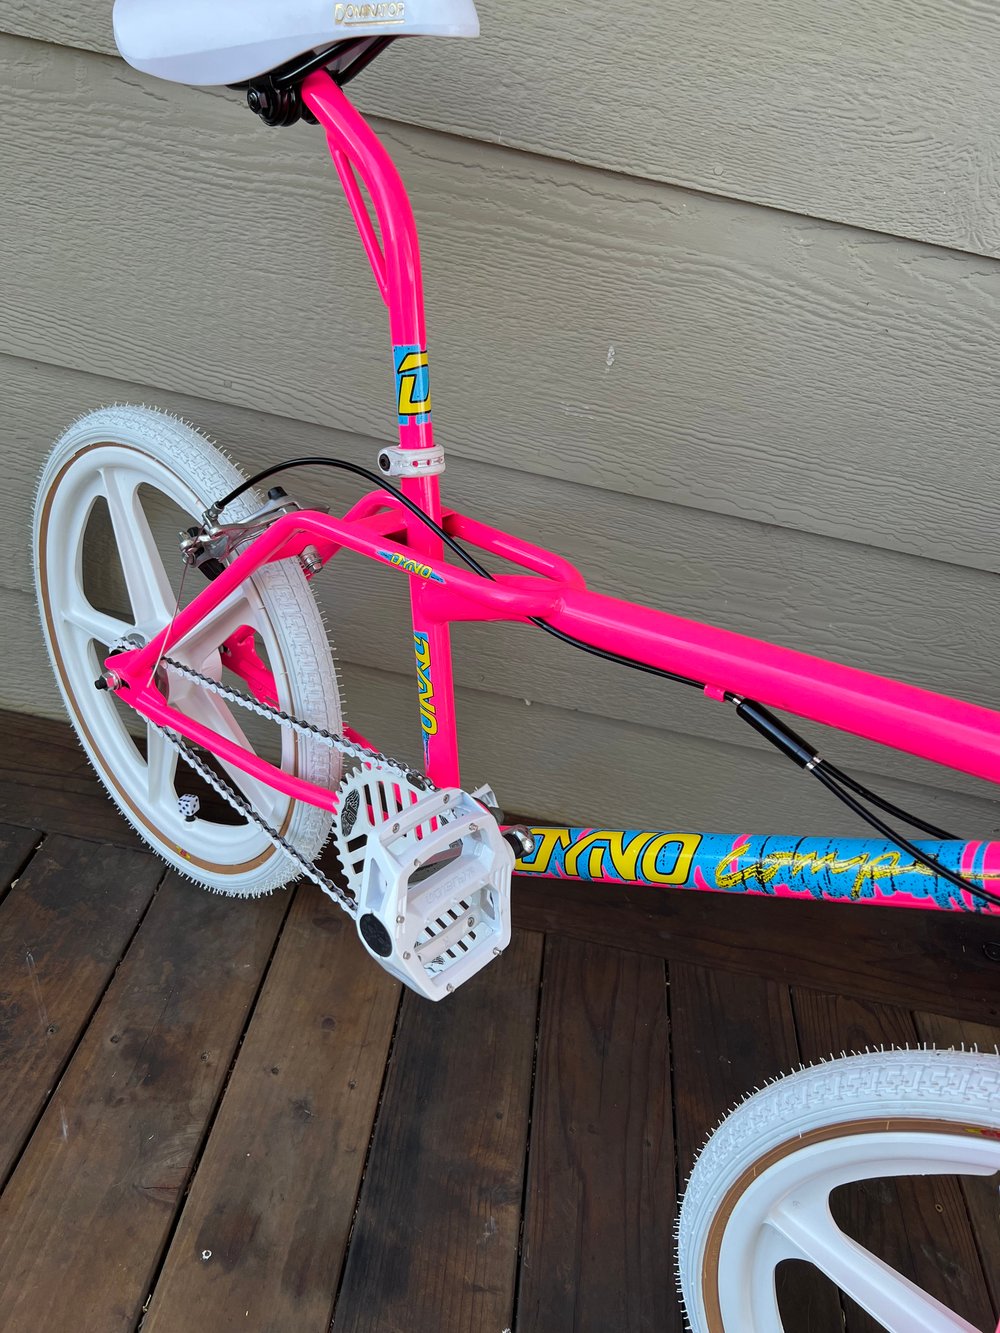 1988 Dyno Compe hot pink 